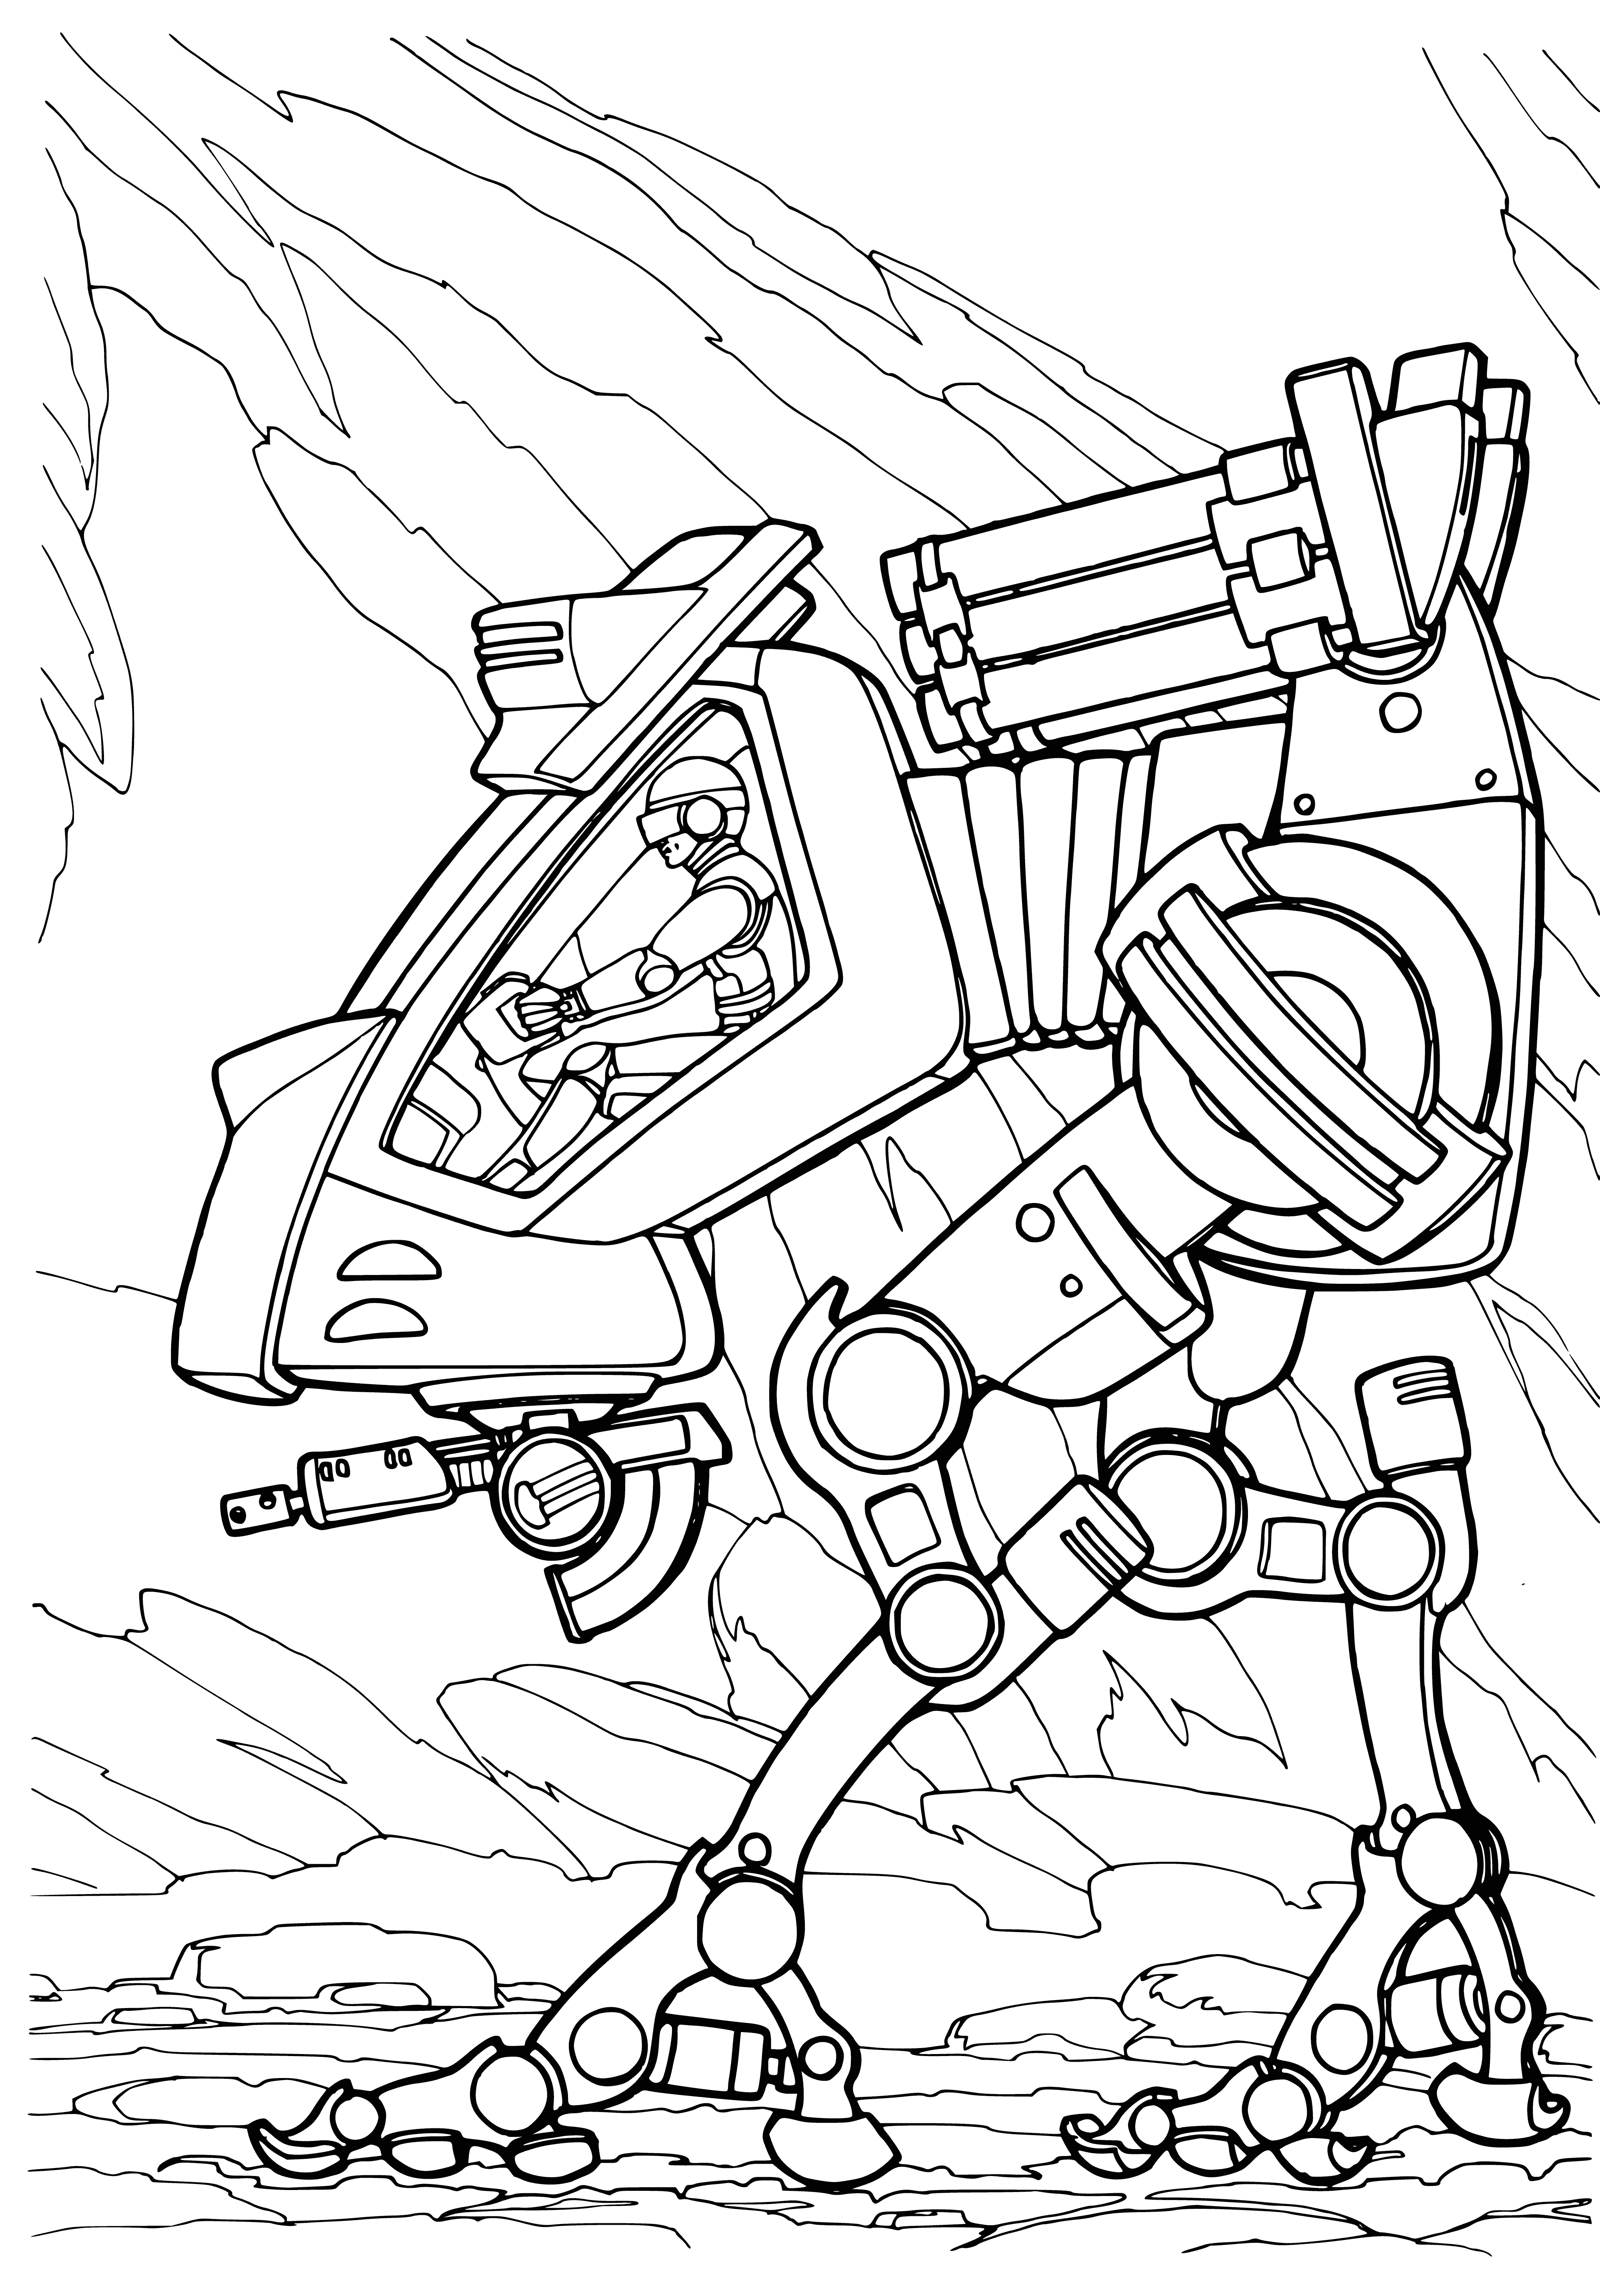 Armored infantry coloring page